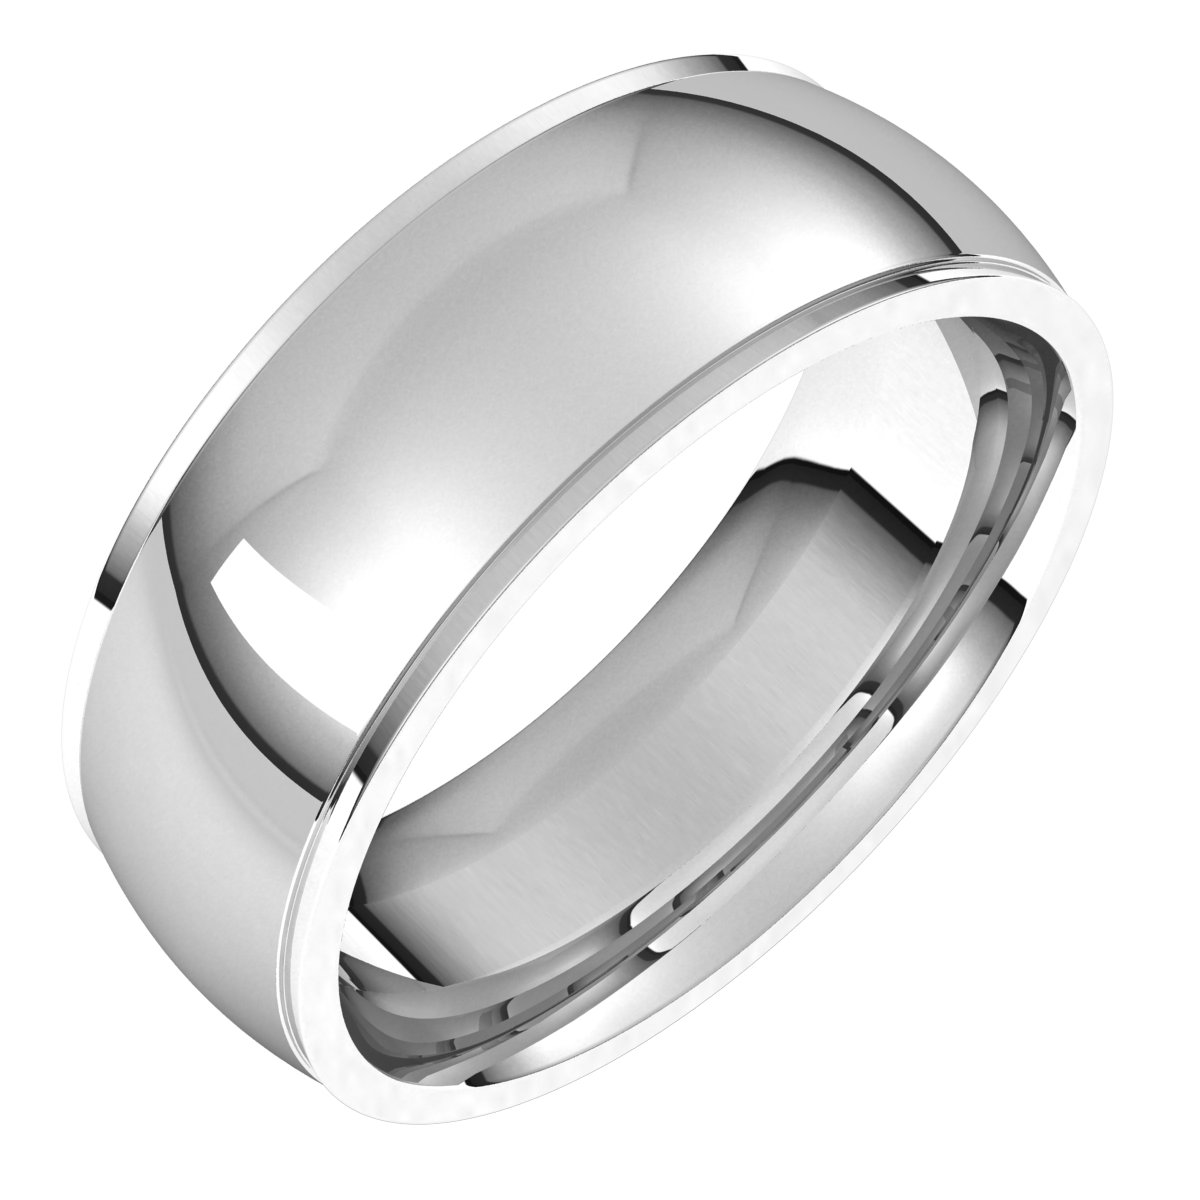 Continuum Sterling Silver 7 mm Comfort Fit Edge Band Size 13 Ref 17387114